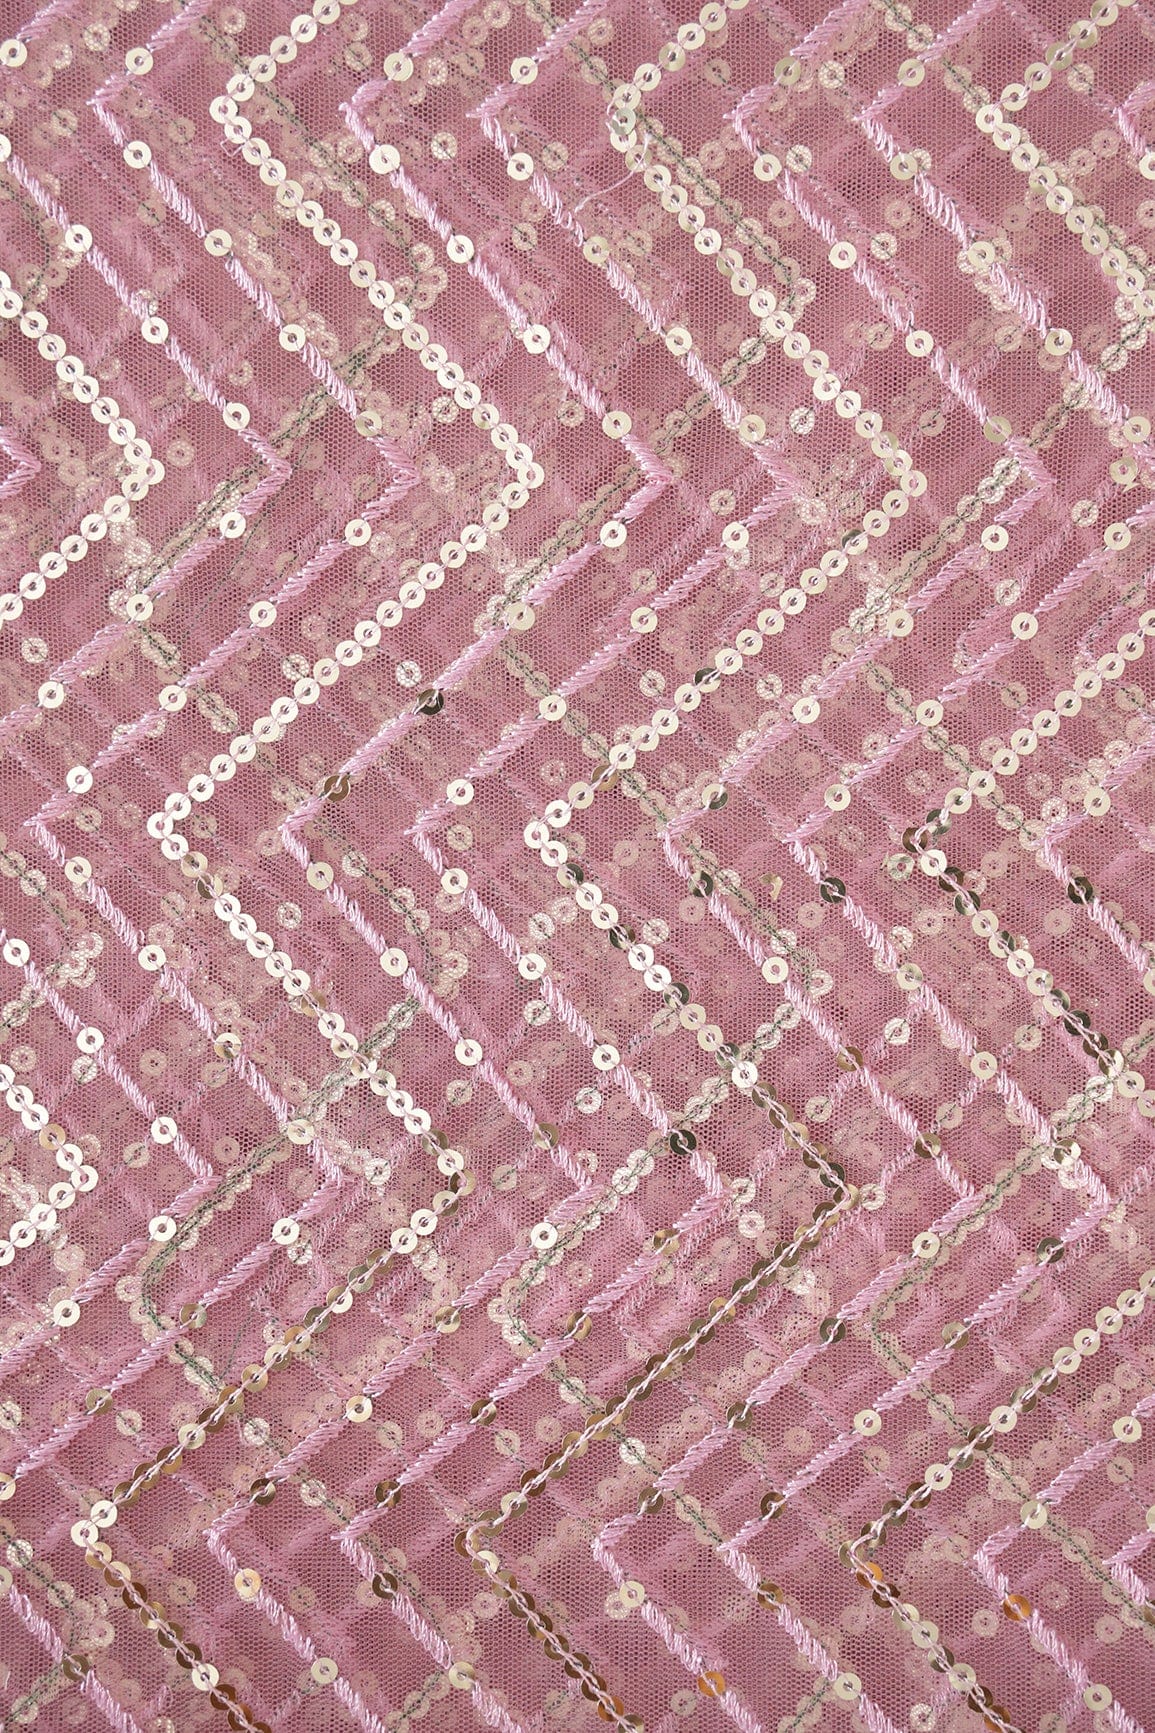 doeraa Embroidery Fabrics 4 Meter Cut Piece Of Gold Sequins With Pink Thread Chevron Embroidery Work On Pink Soft Net Fabric